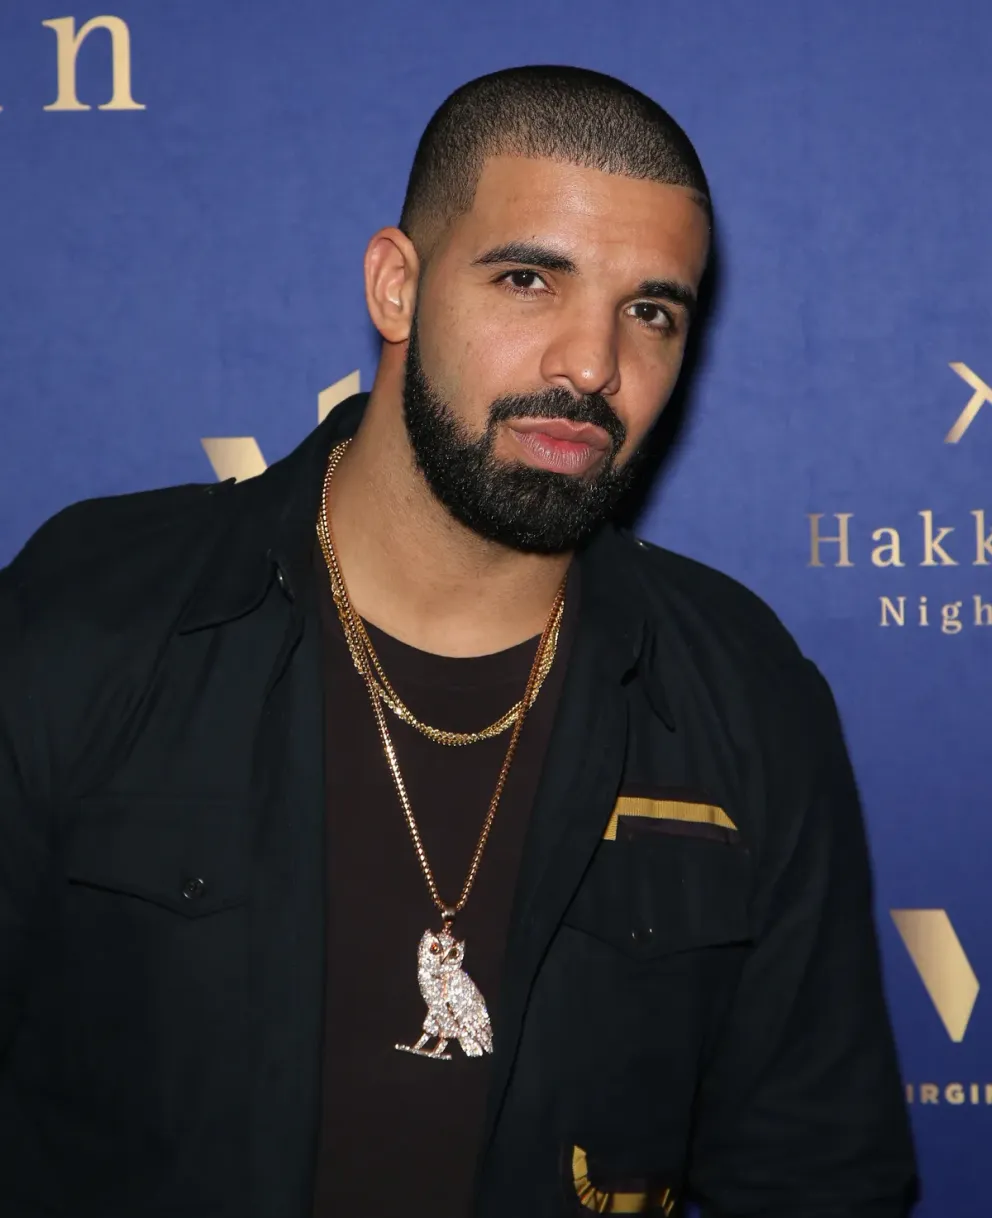 Drake during an after party for his concert in September 2016. | Photo: Getty Images